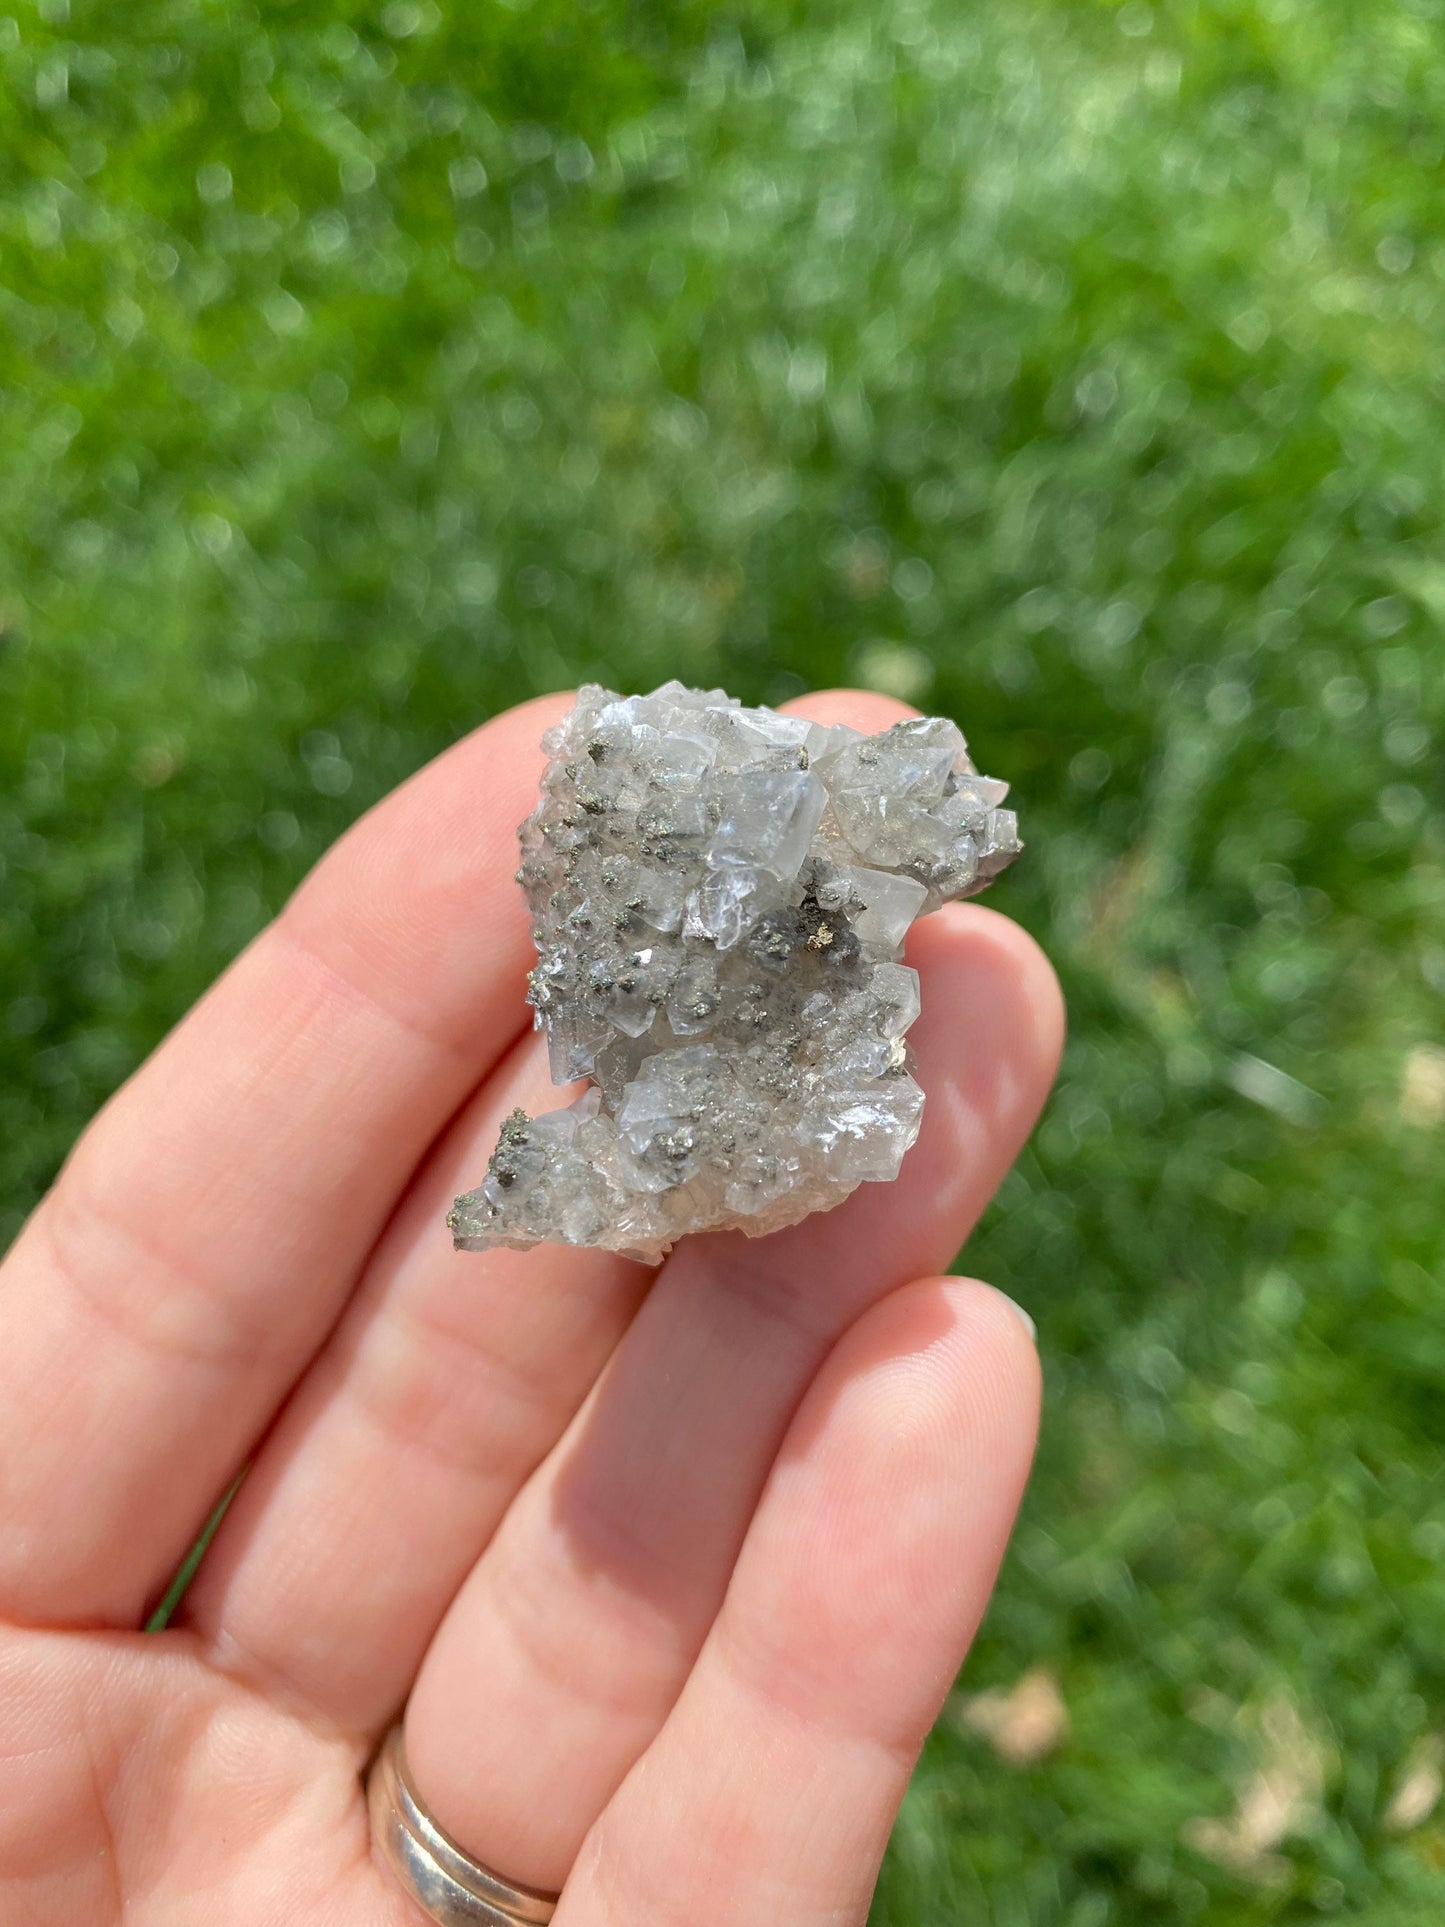 Clear/Gray Calcite Crystal Specimen with Marcasite - Buffalo Iowa - Linwood Mine